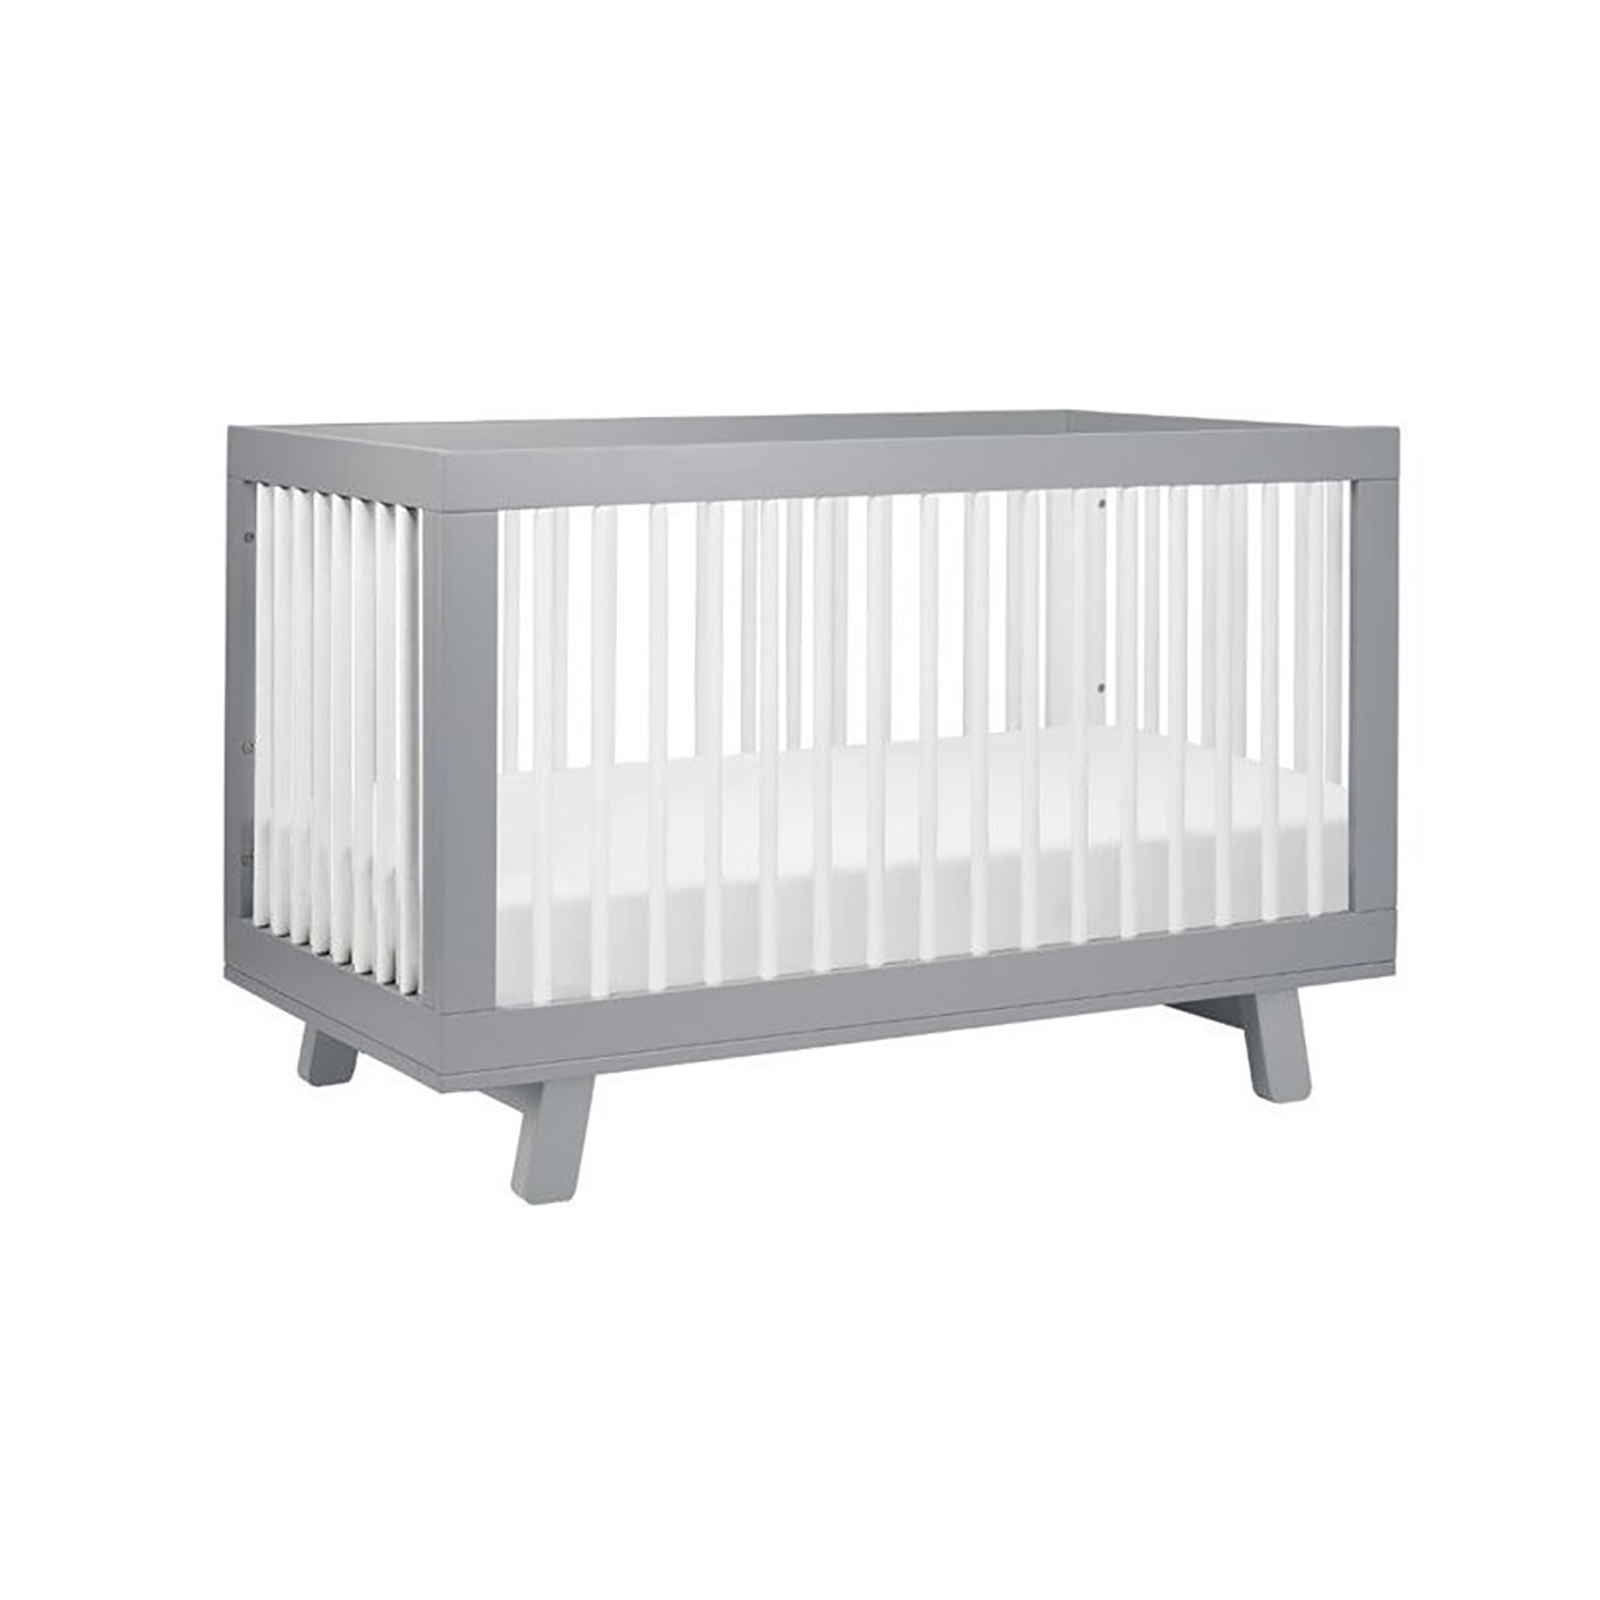 BabyLetto Hudson 3-in-1 Convertible Crib w/ Toddler Bed Conversion Kit - Gray/White